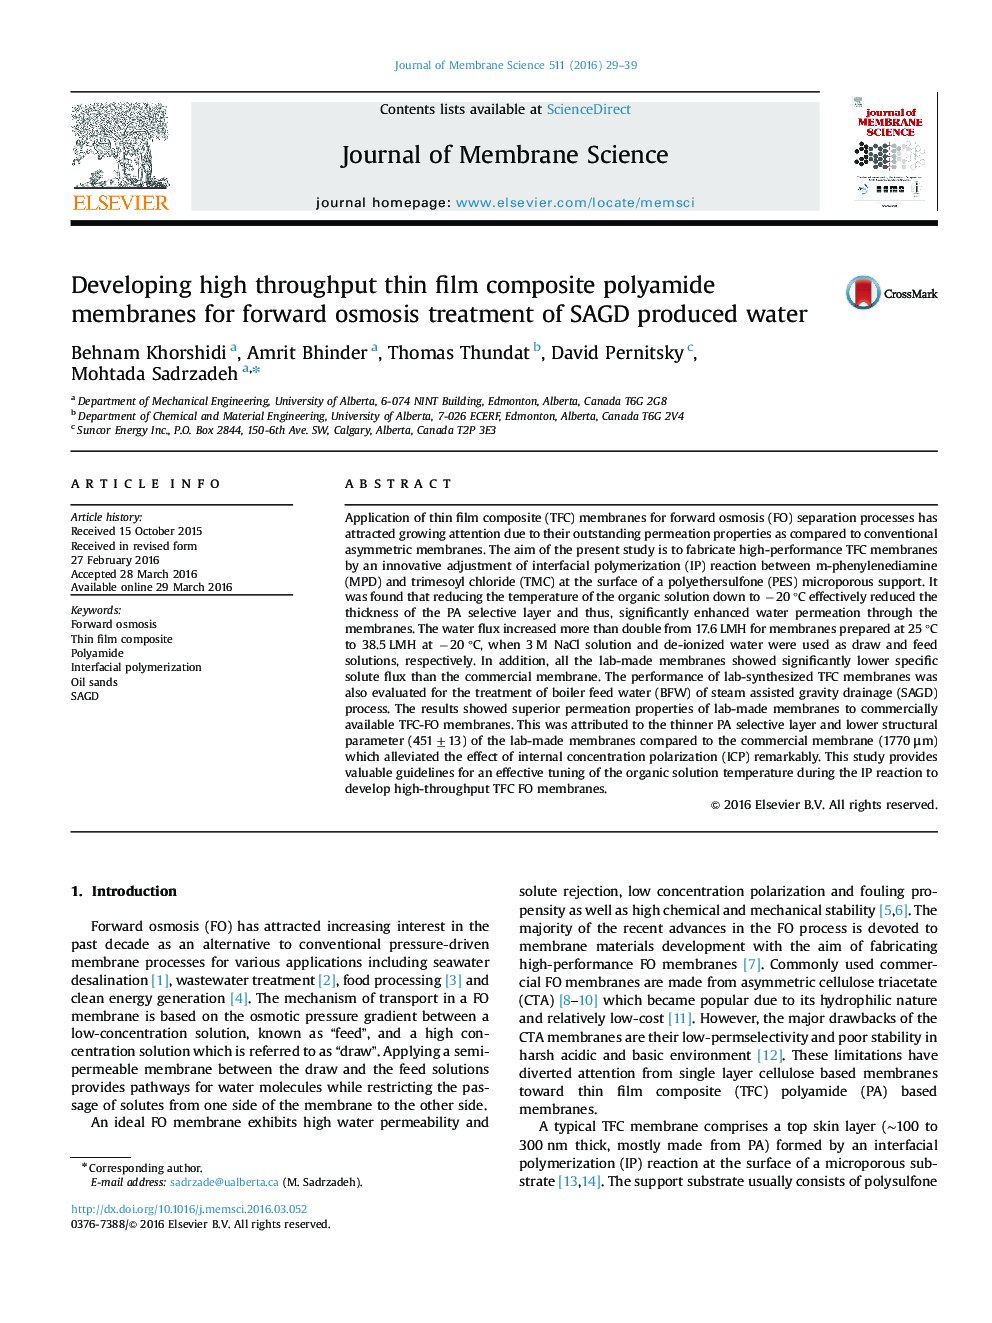 Developing high throughput thin film composite polyamide membranes for forward osmosis treatment of SAGD produced water